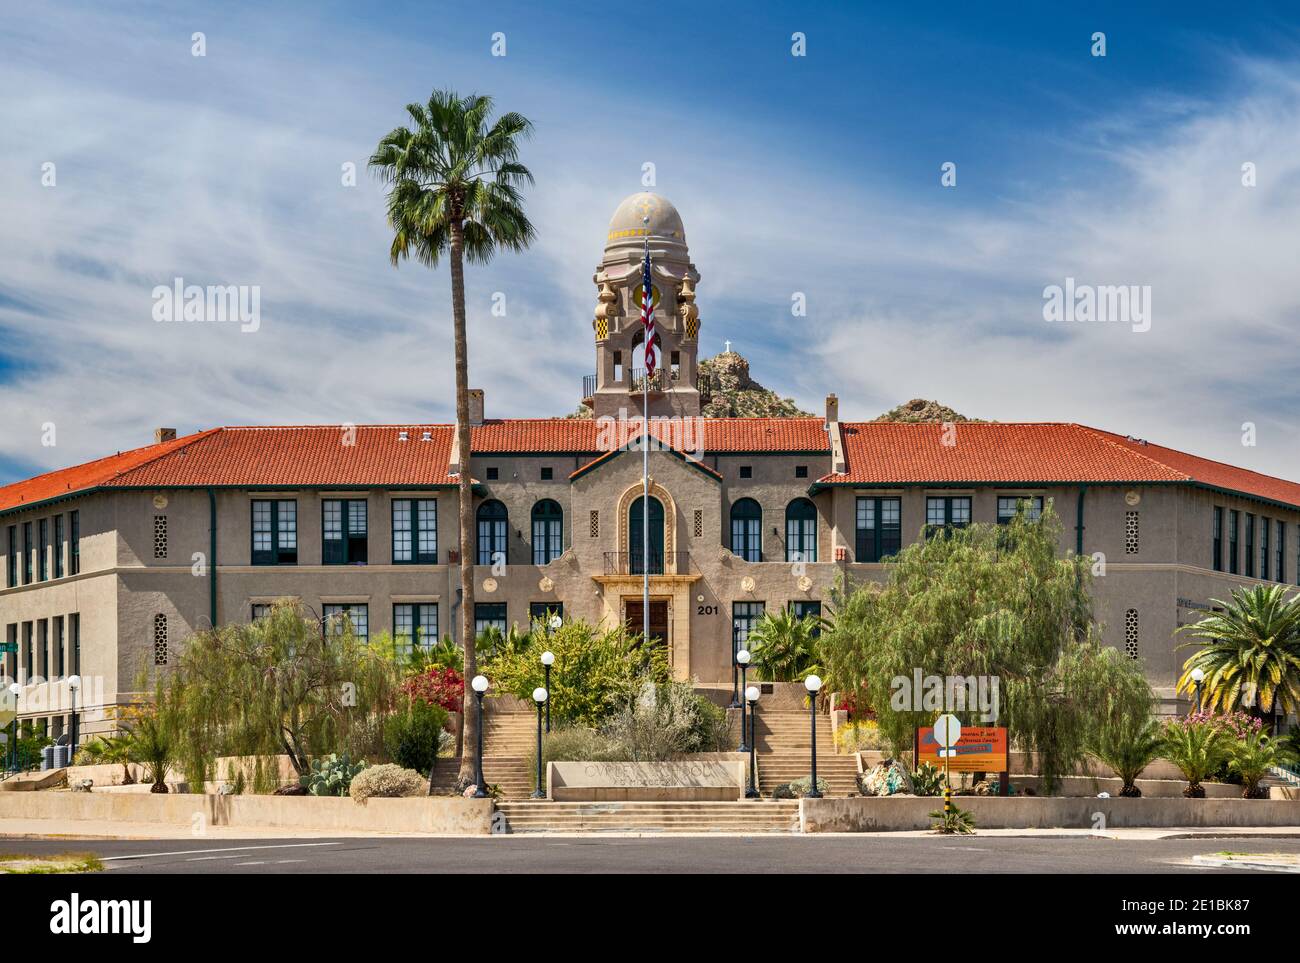 Curley School, 1919, now Sonoran Desert Conference Center, Spanish Colonial Revival style, Ajo, Arizona, USA Stock Photo